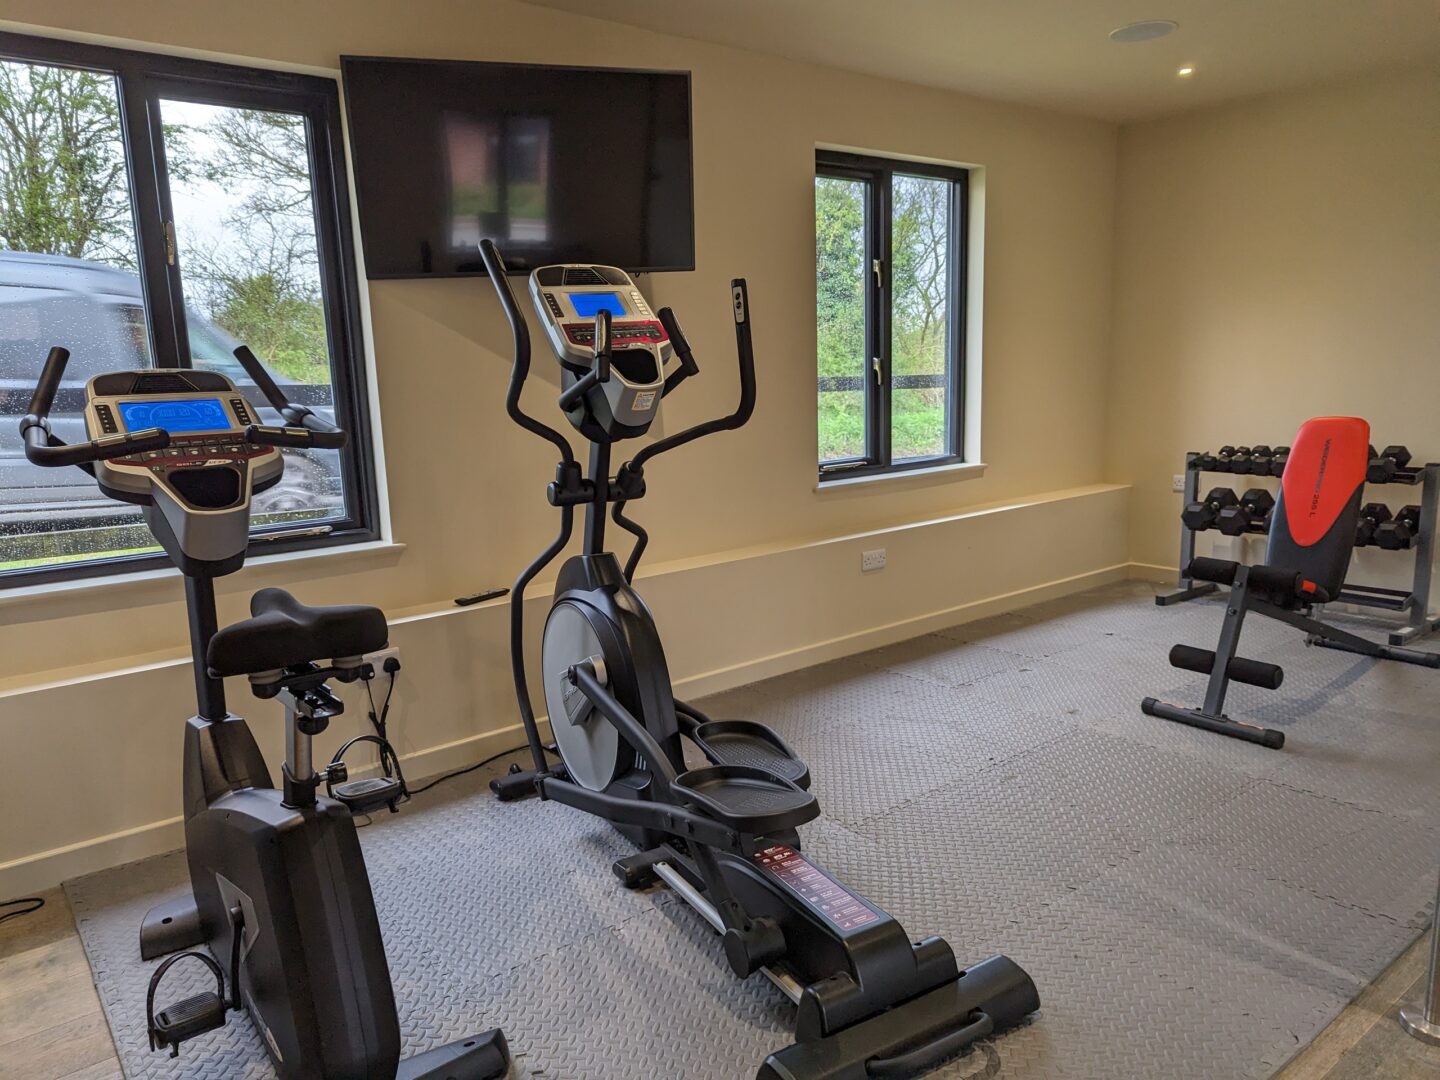 suffolk holiday accommodation with gym